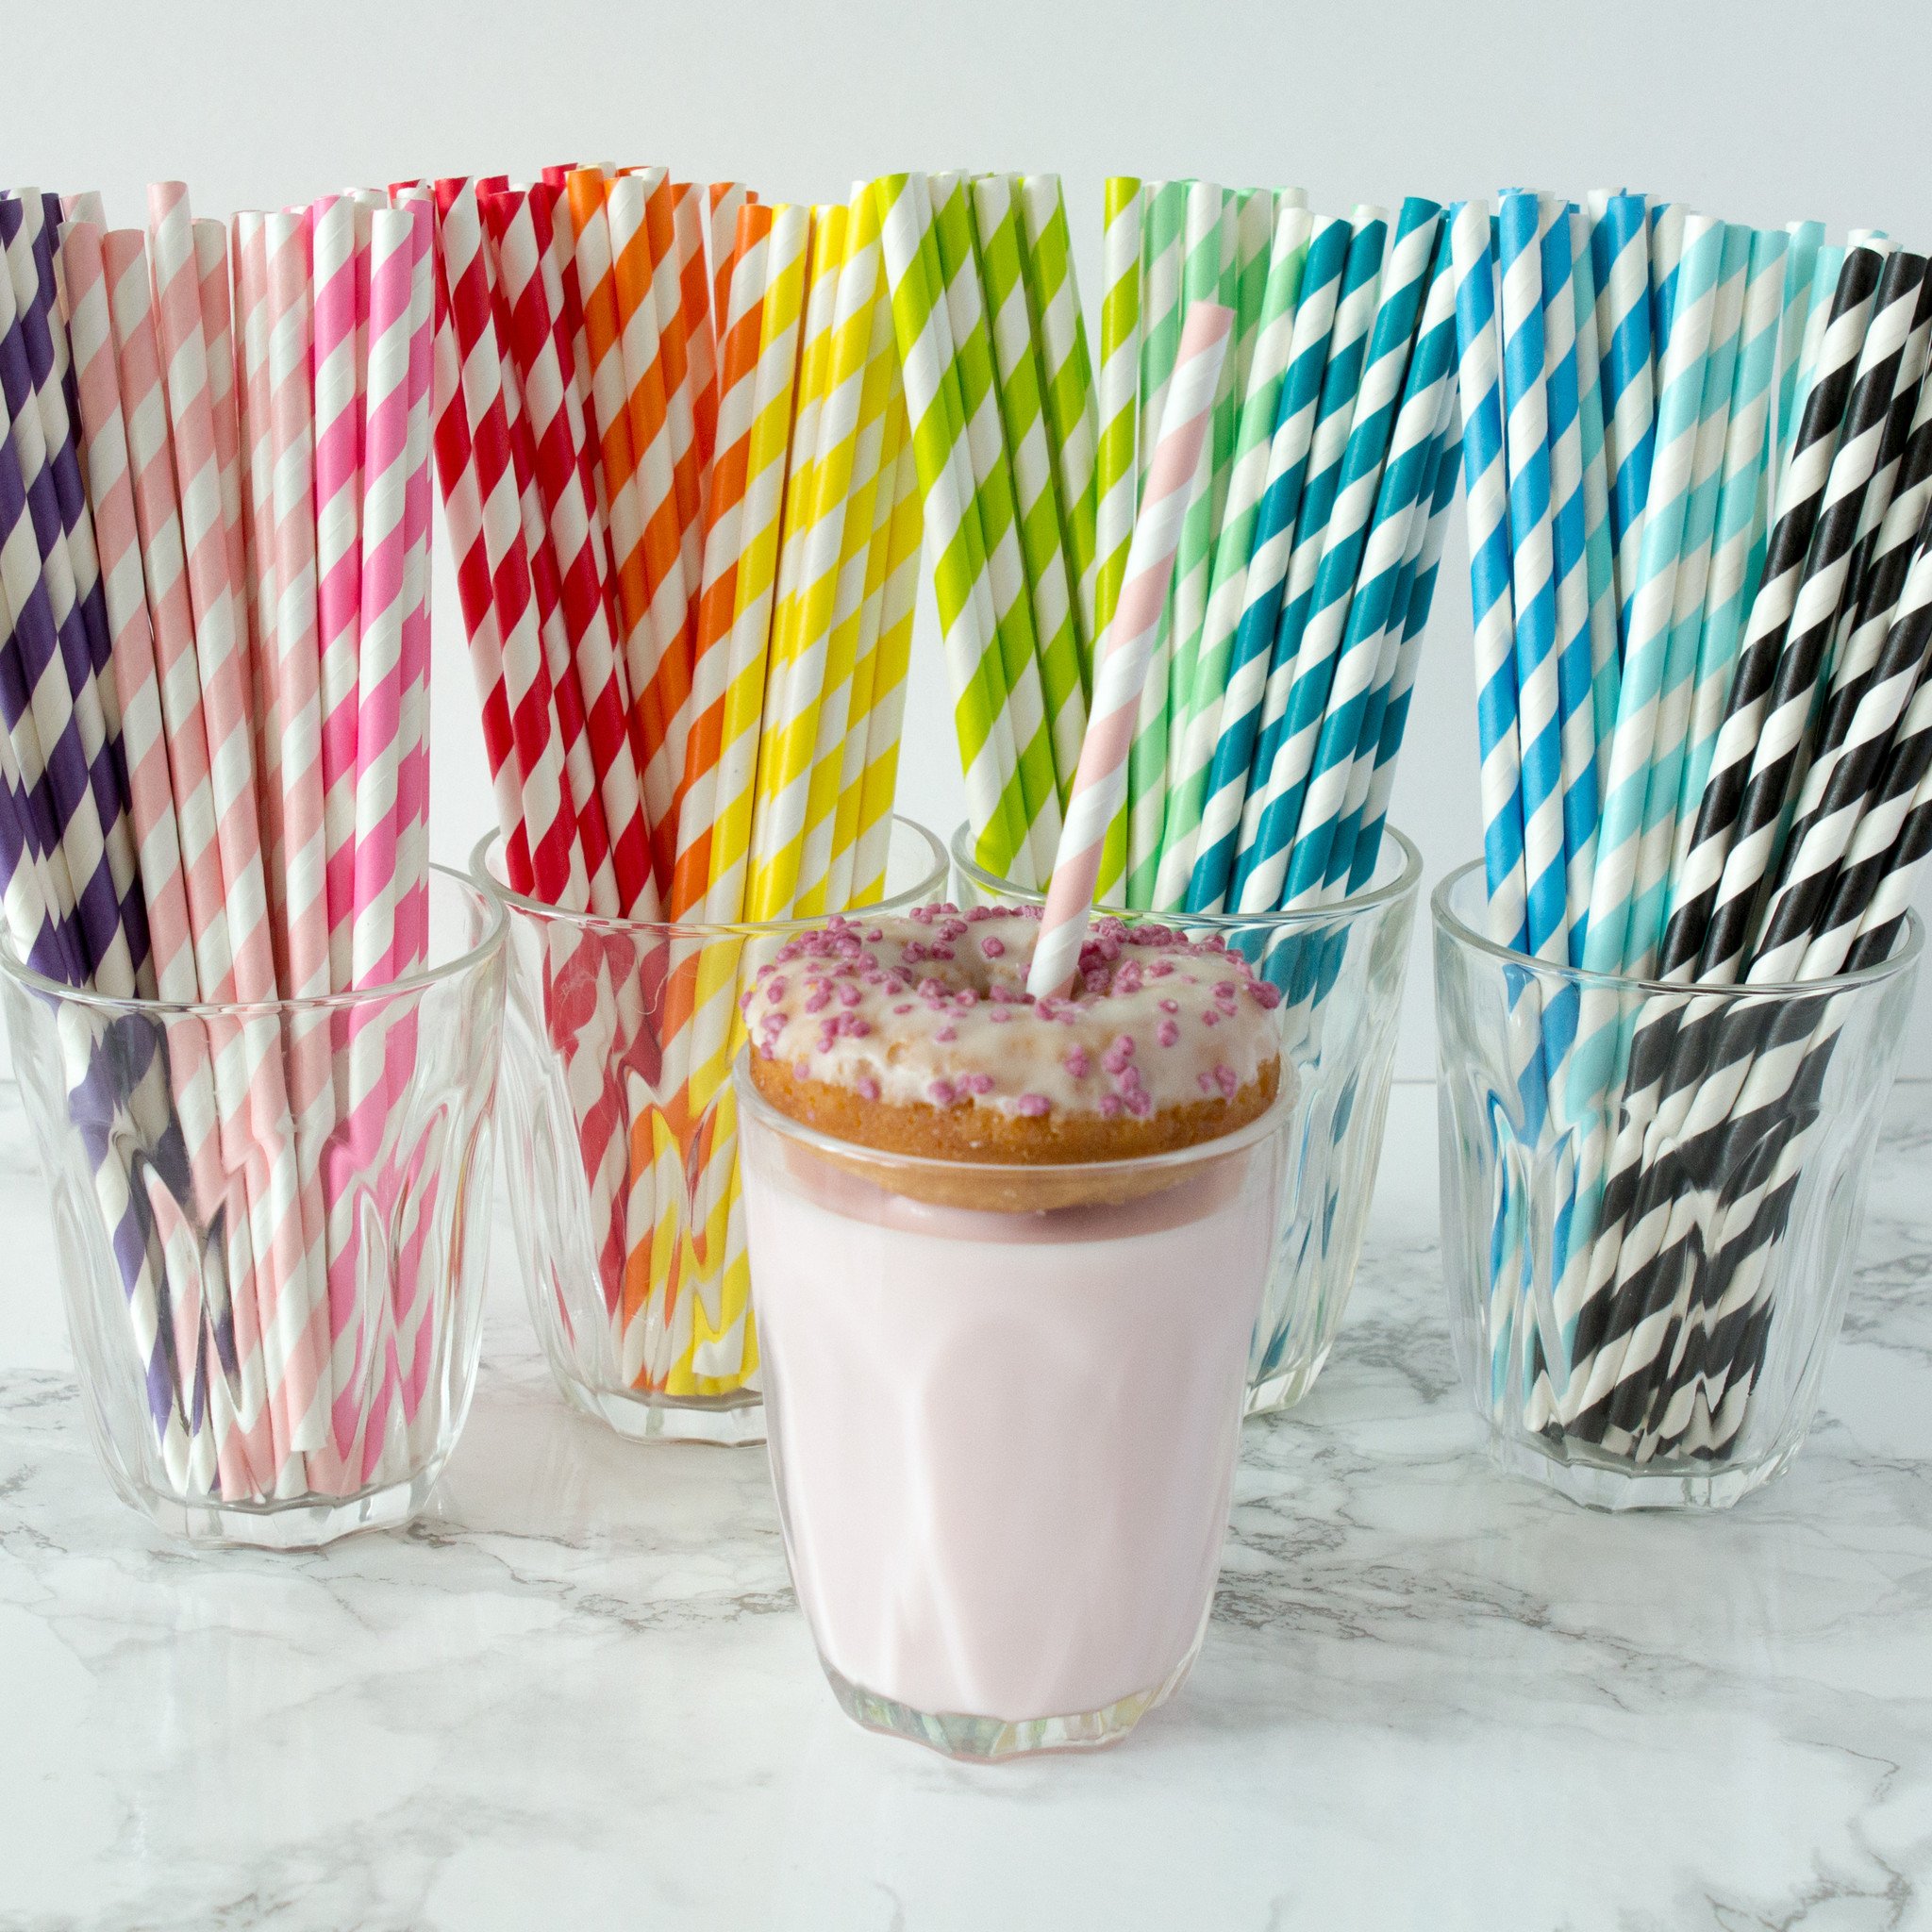 Paper straws help protect the environment and the health of the whole family